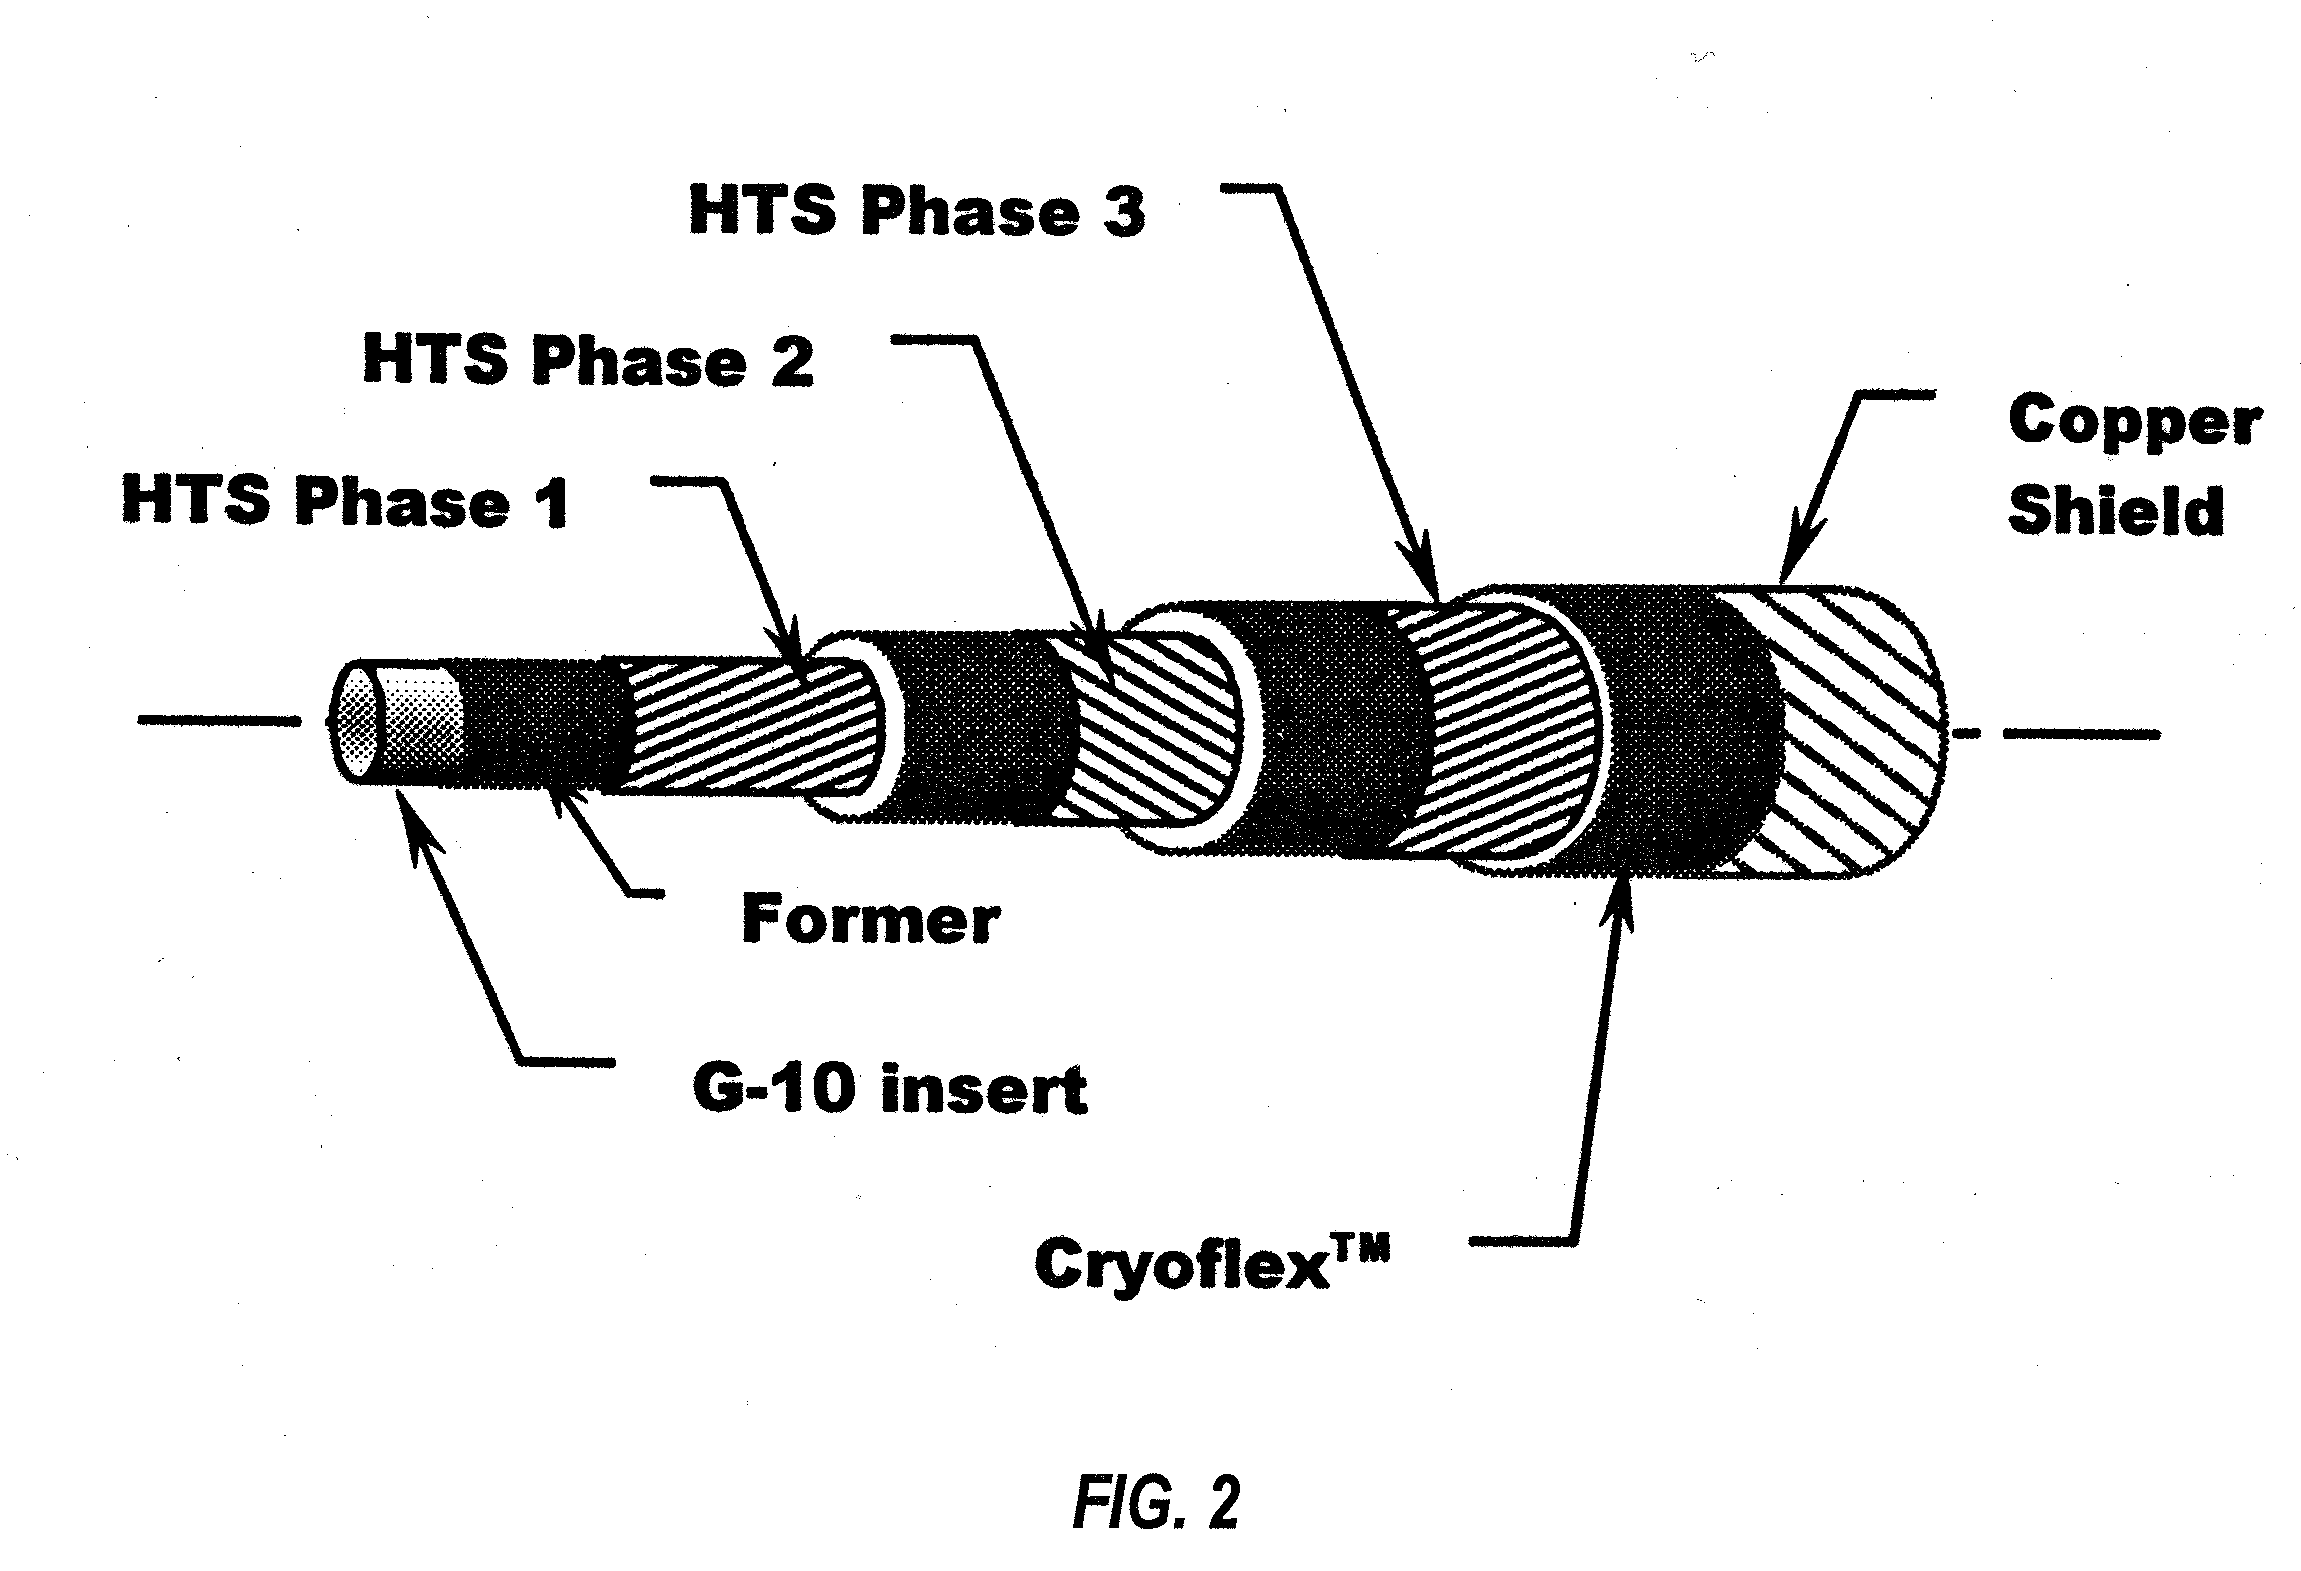 Triaxial Superconducting Cable and Termination Therefor